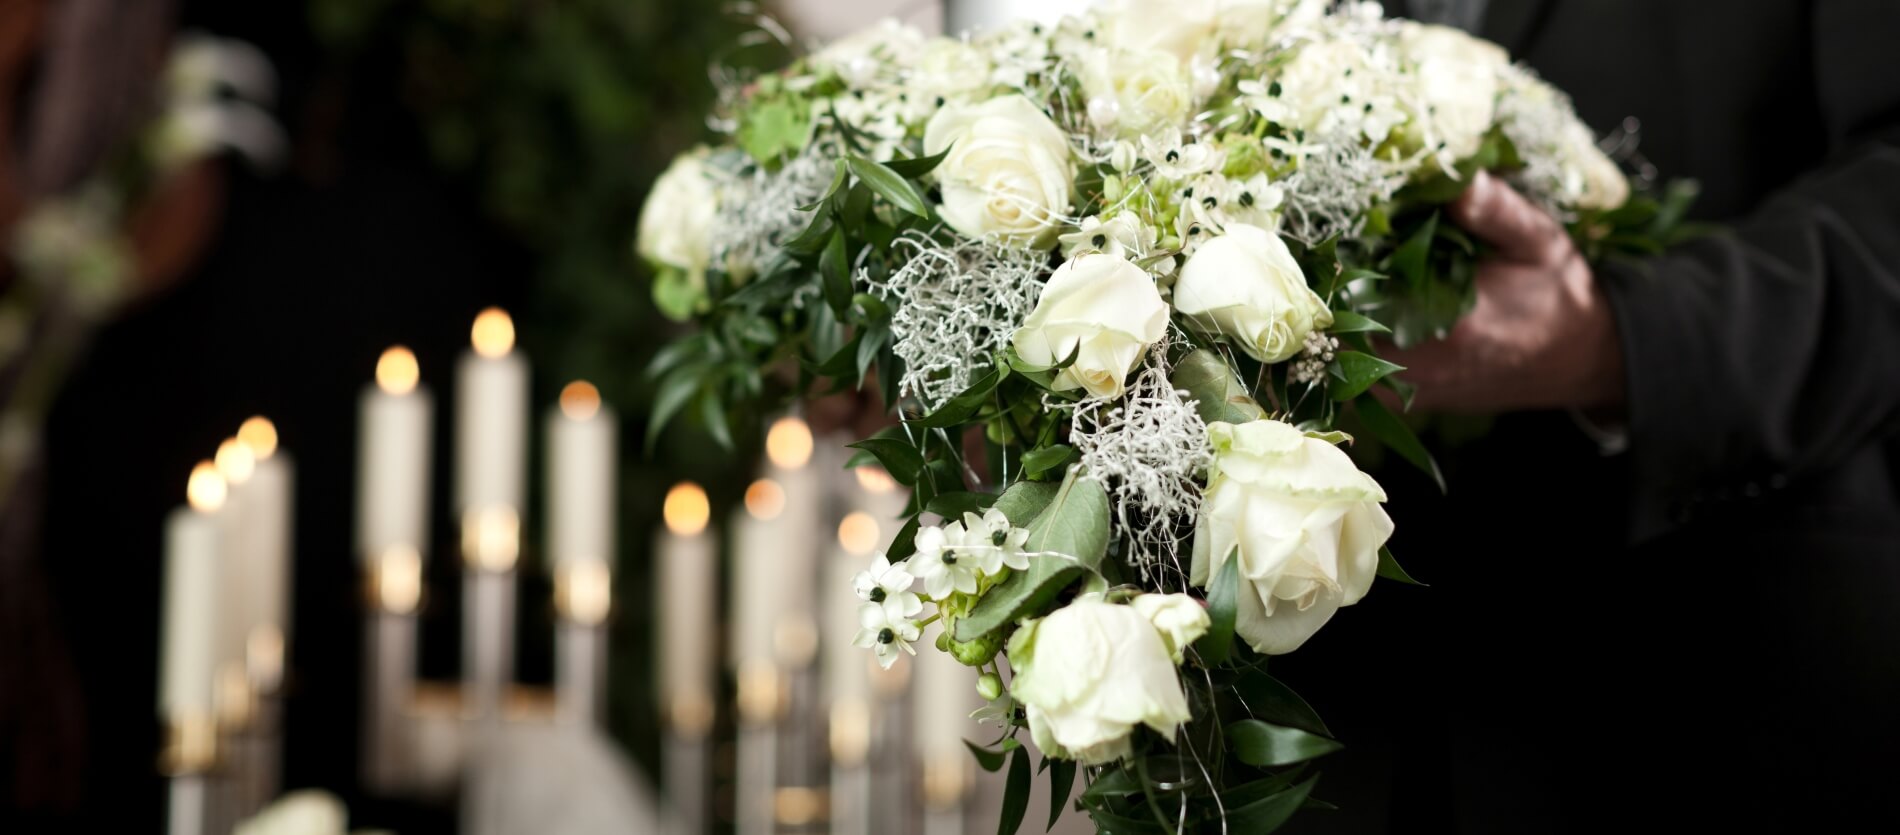 White roses flower arrangement being carried with an urn with candles in the background